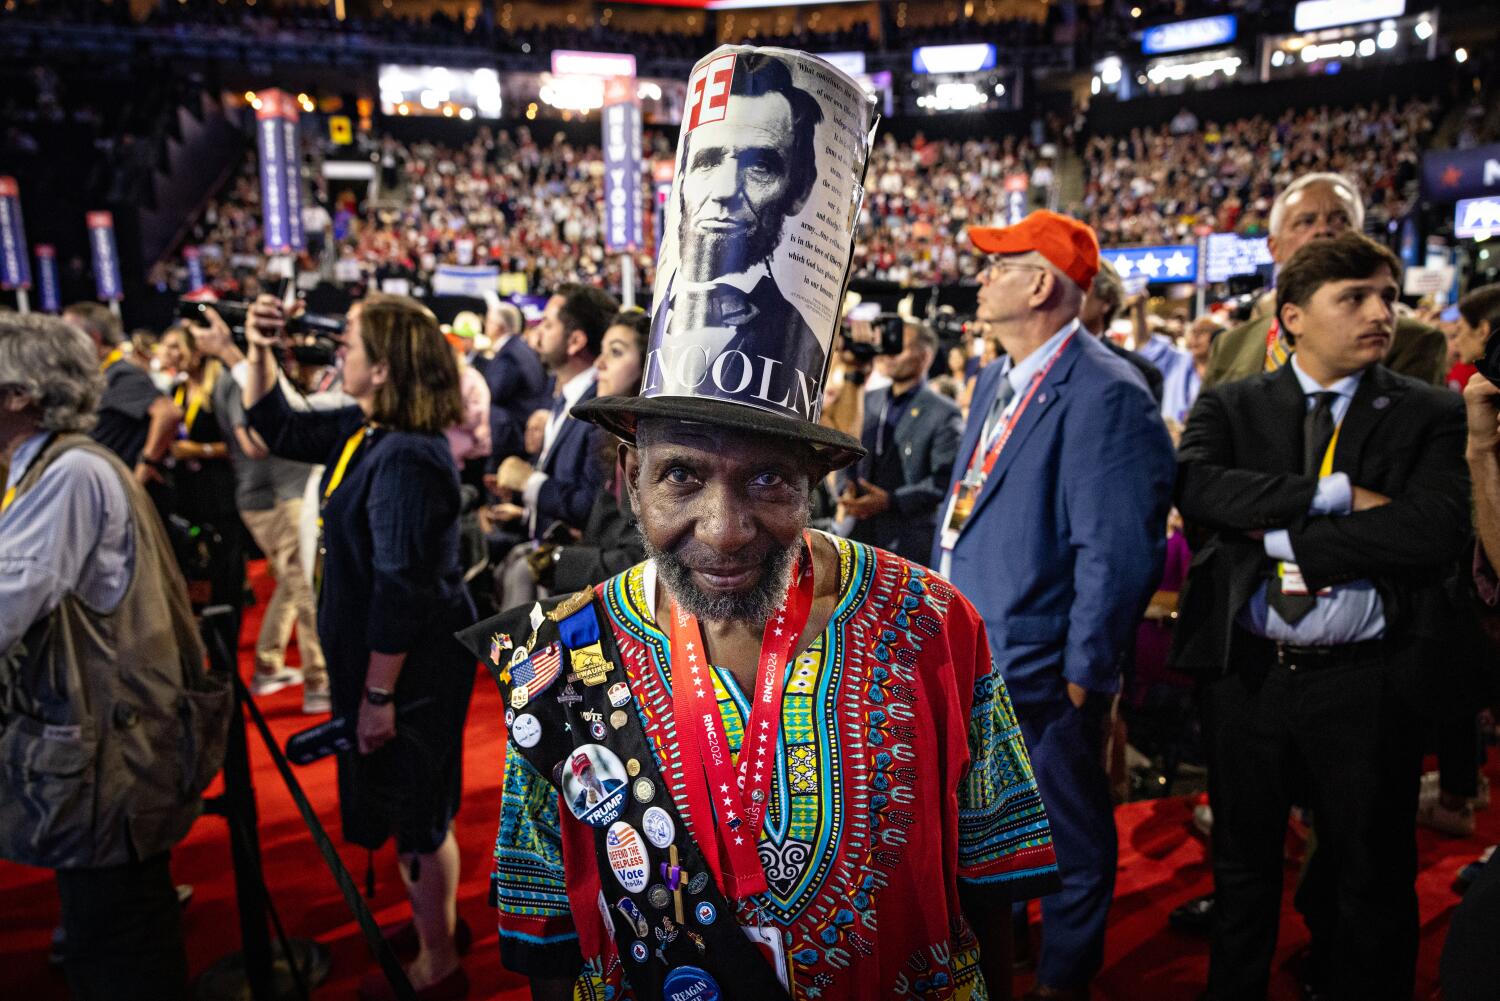 Forget the Oscars. For Republicans, the convention is fashion nirvana